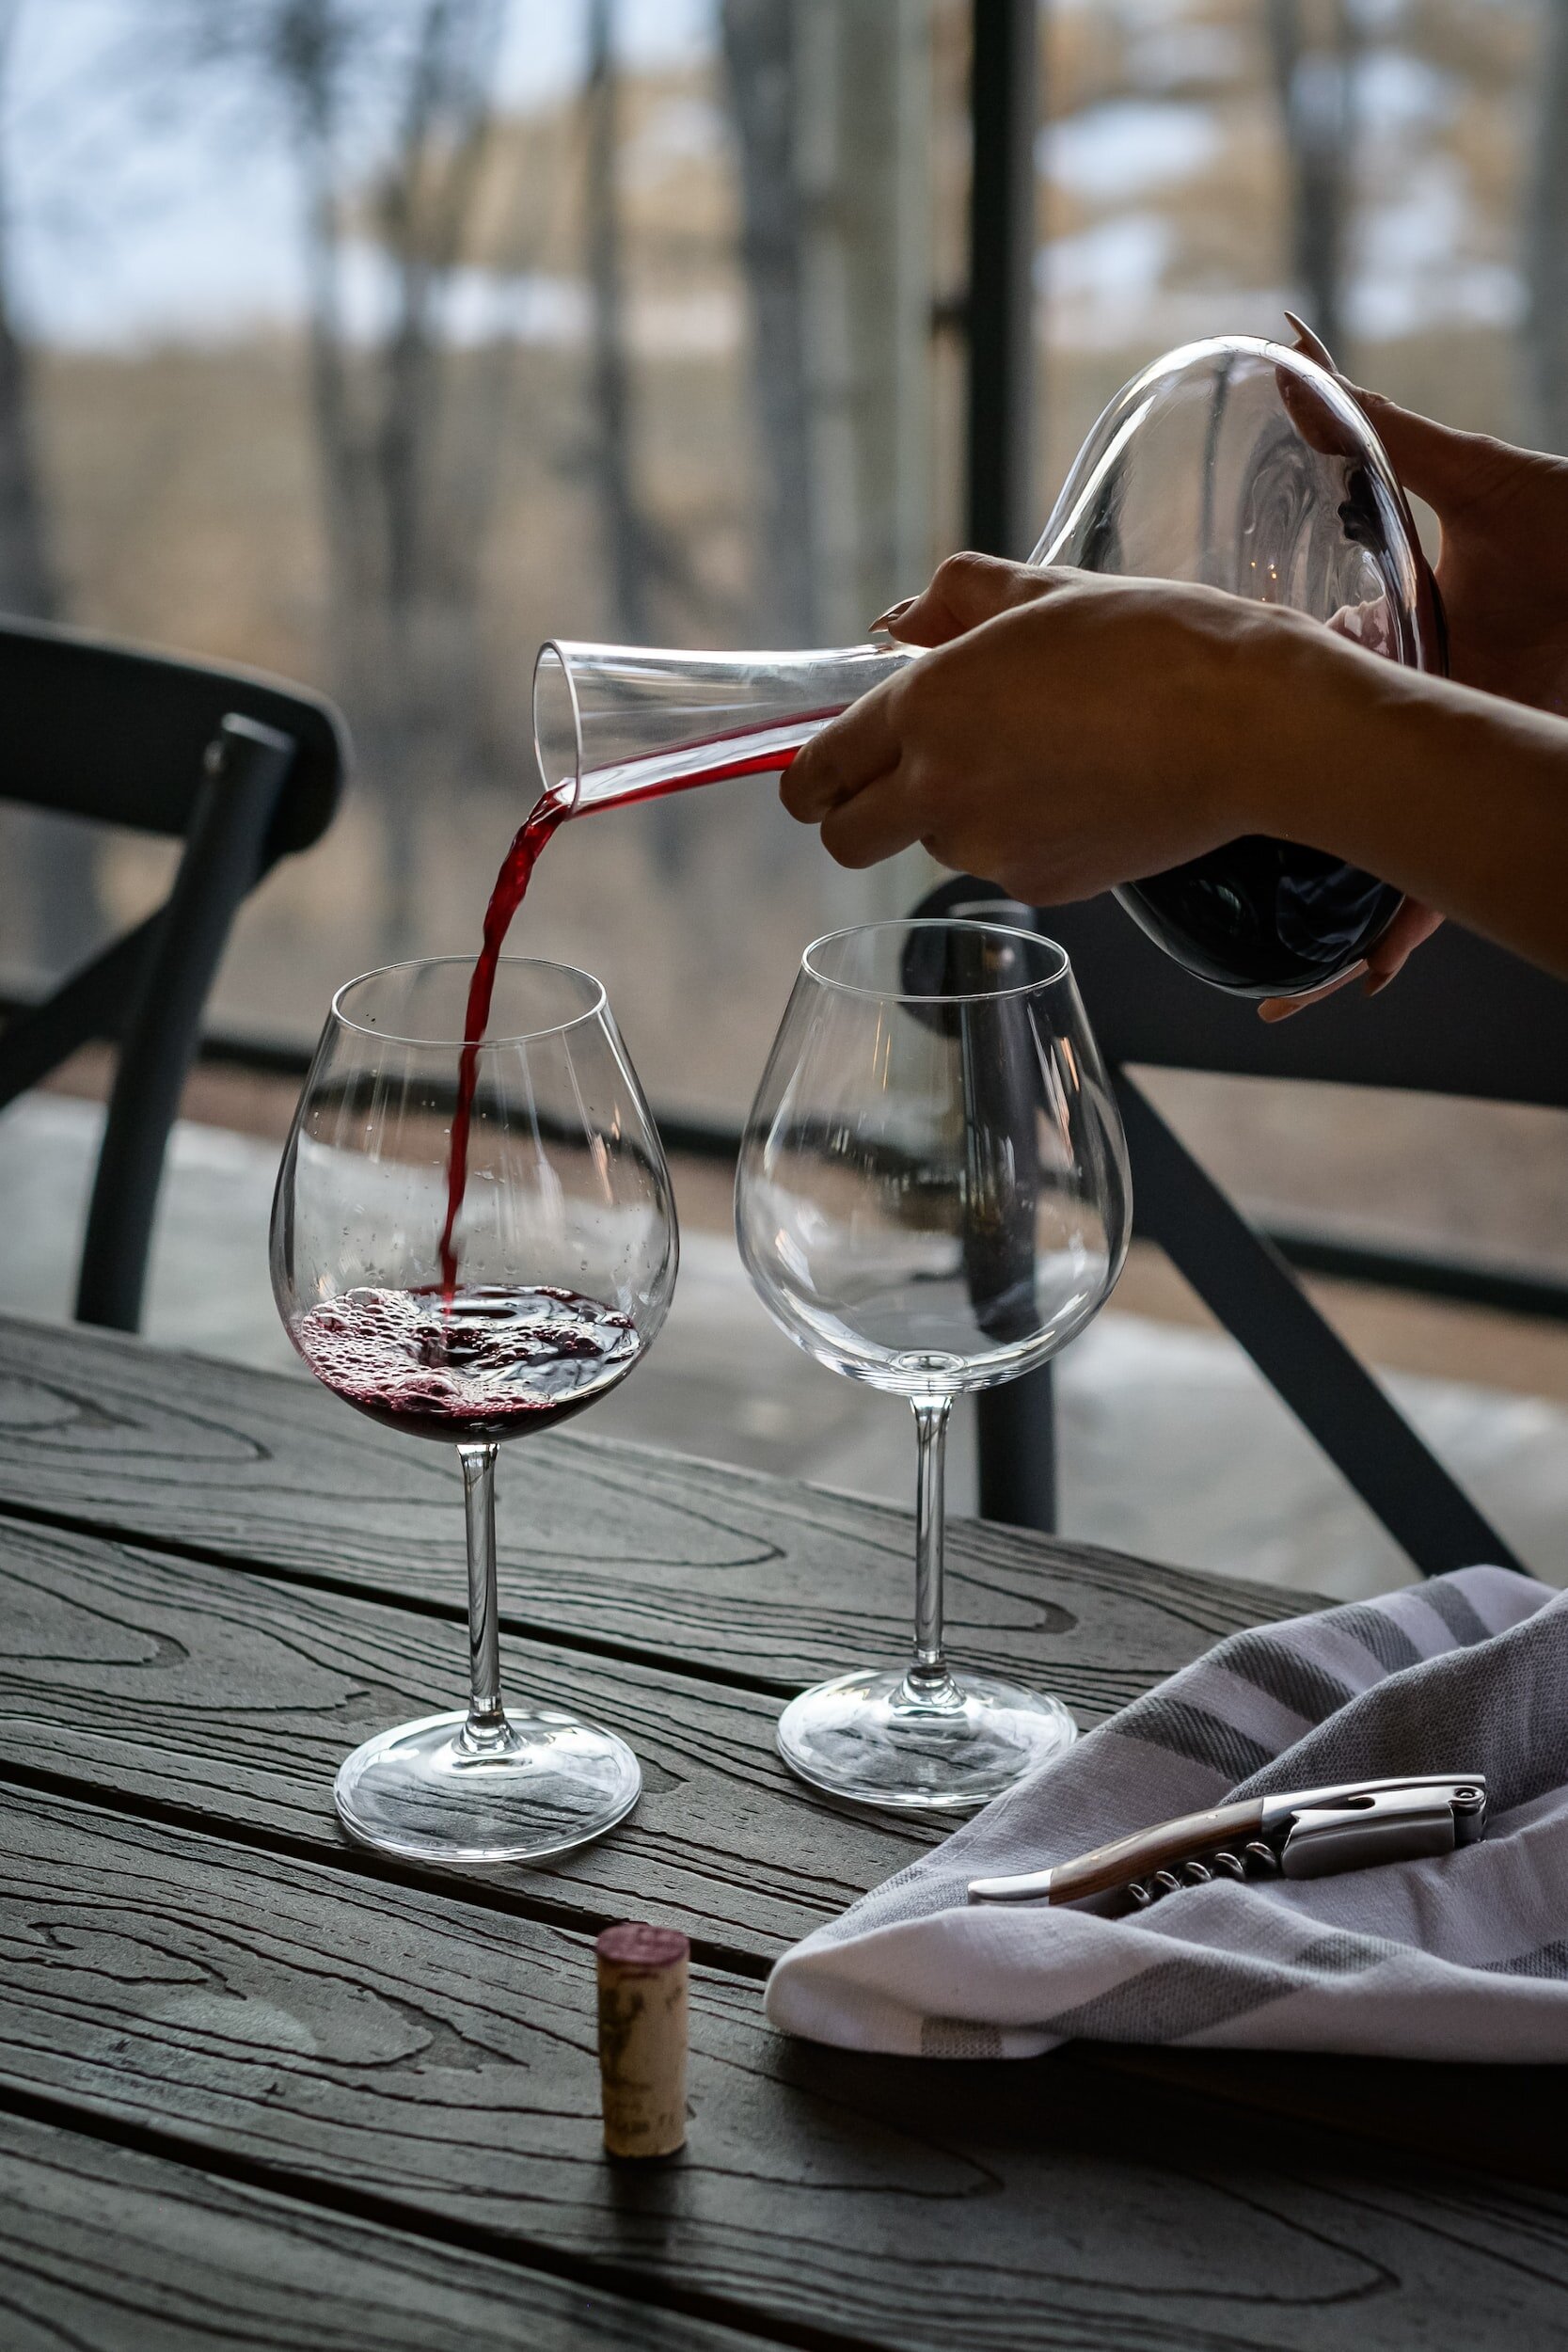 Pouring wine into glasses from a carafe